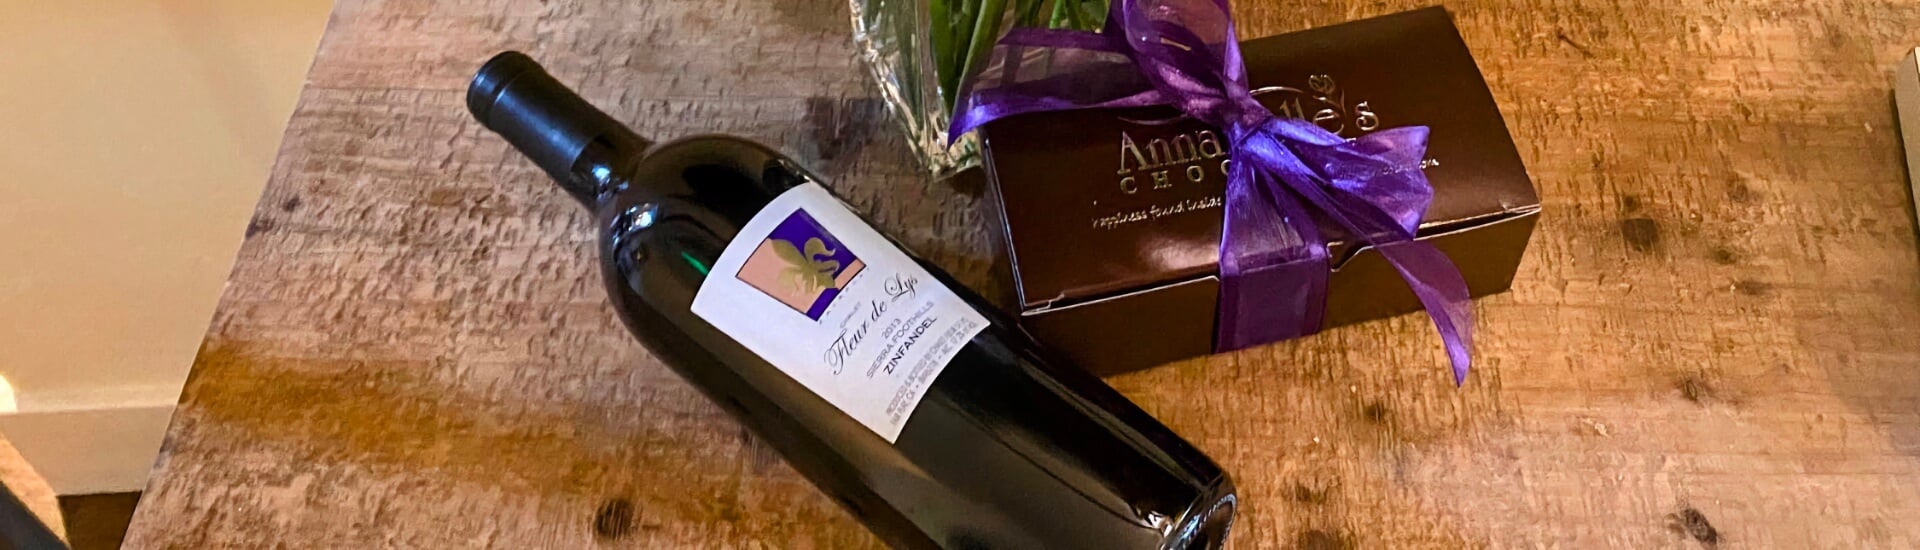 a box of chocolates with a purple ribbon and a bottle of wine